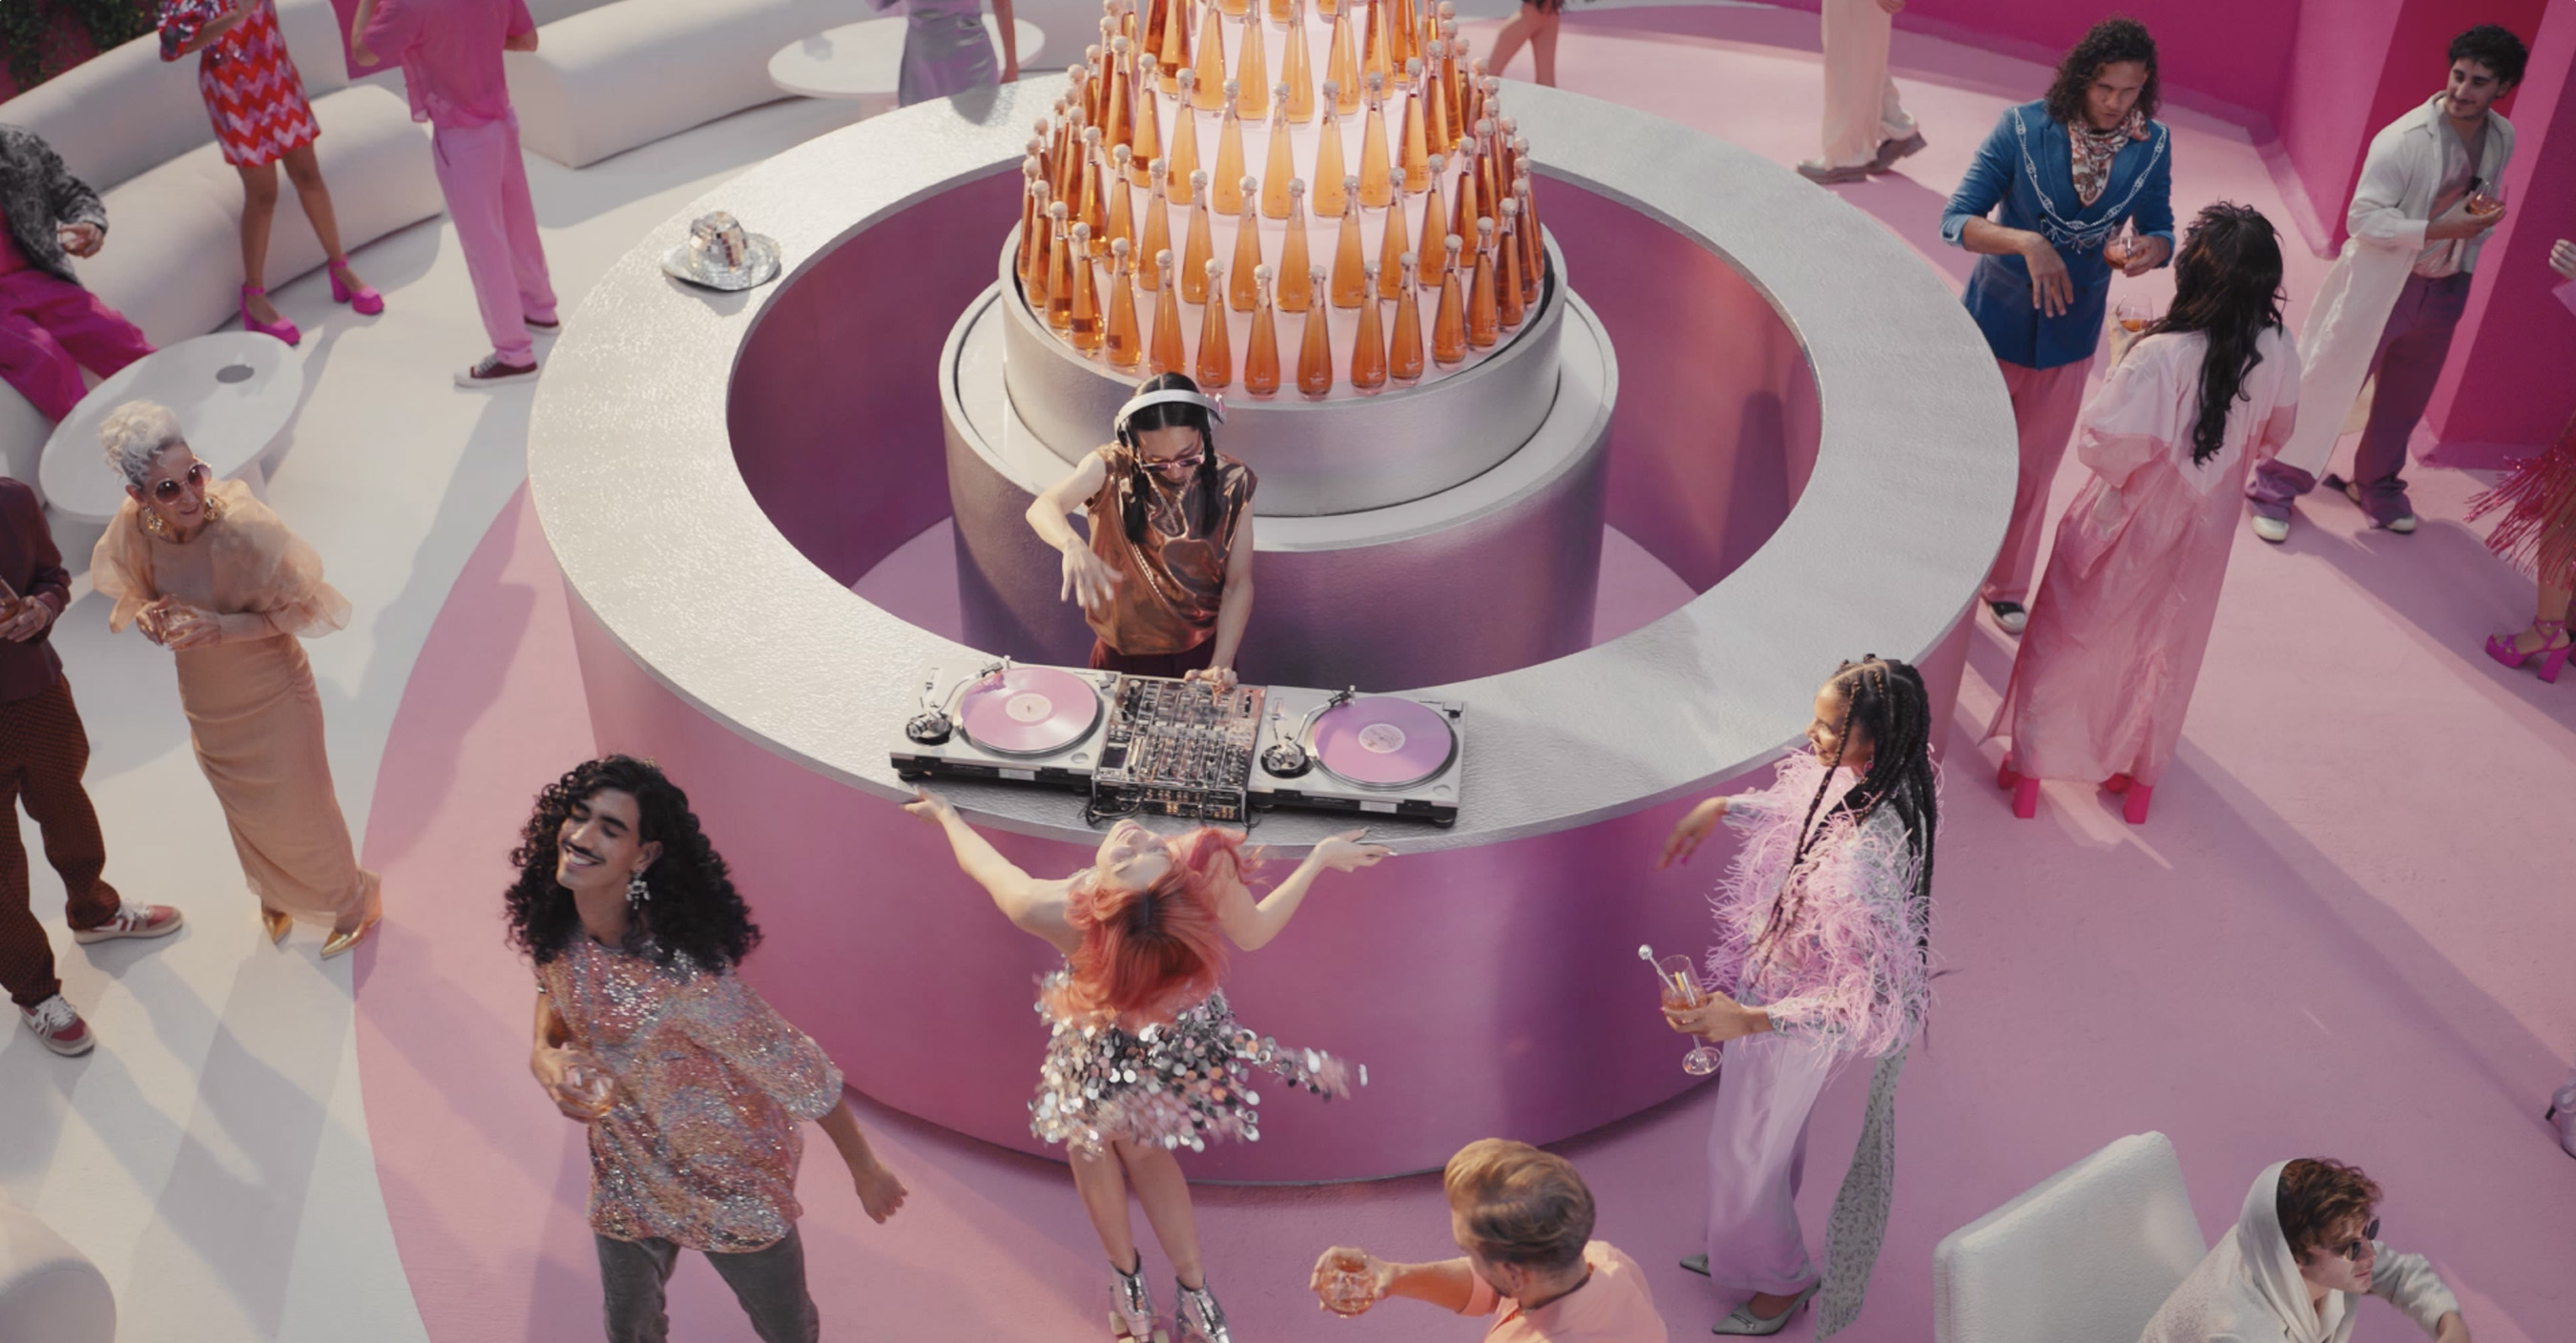 Play Video: Tequila Don Julio Rosado is debuting with a new creative campaign that lures you into the fantastical Rosado world and depicts how the best celebrations can happen during the day.